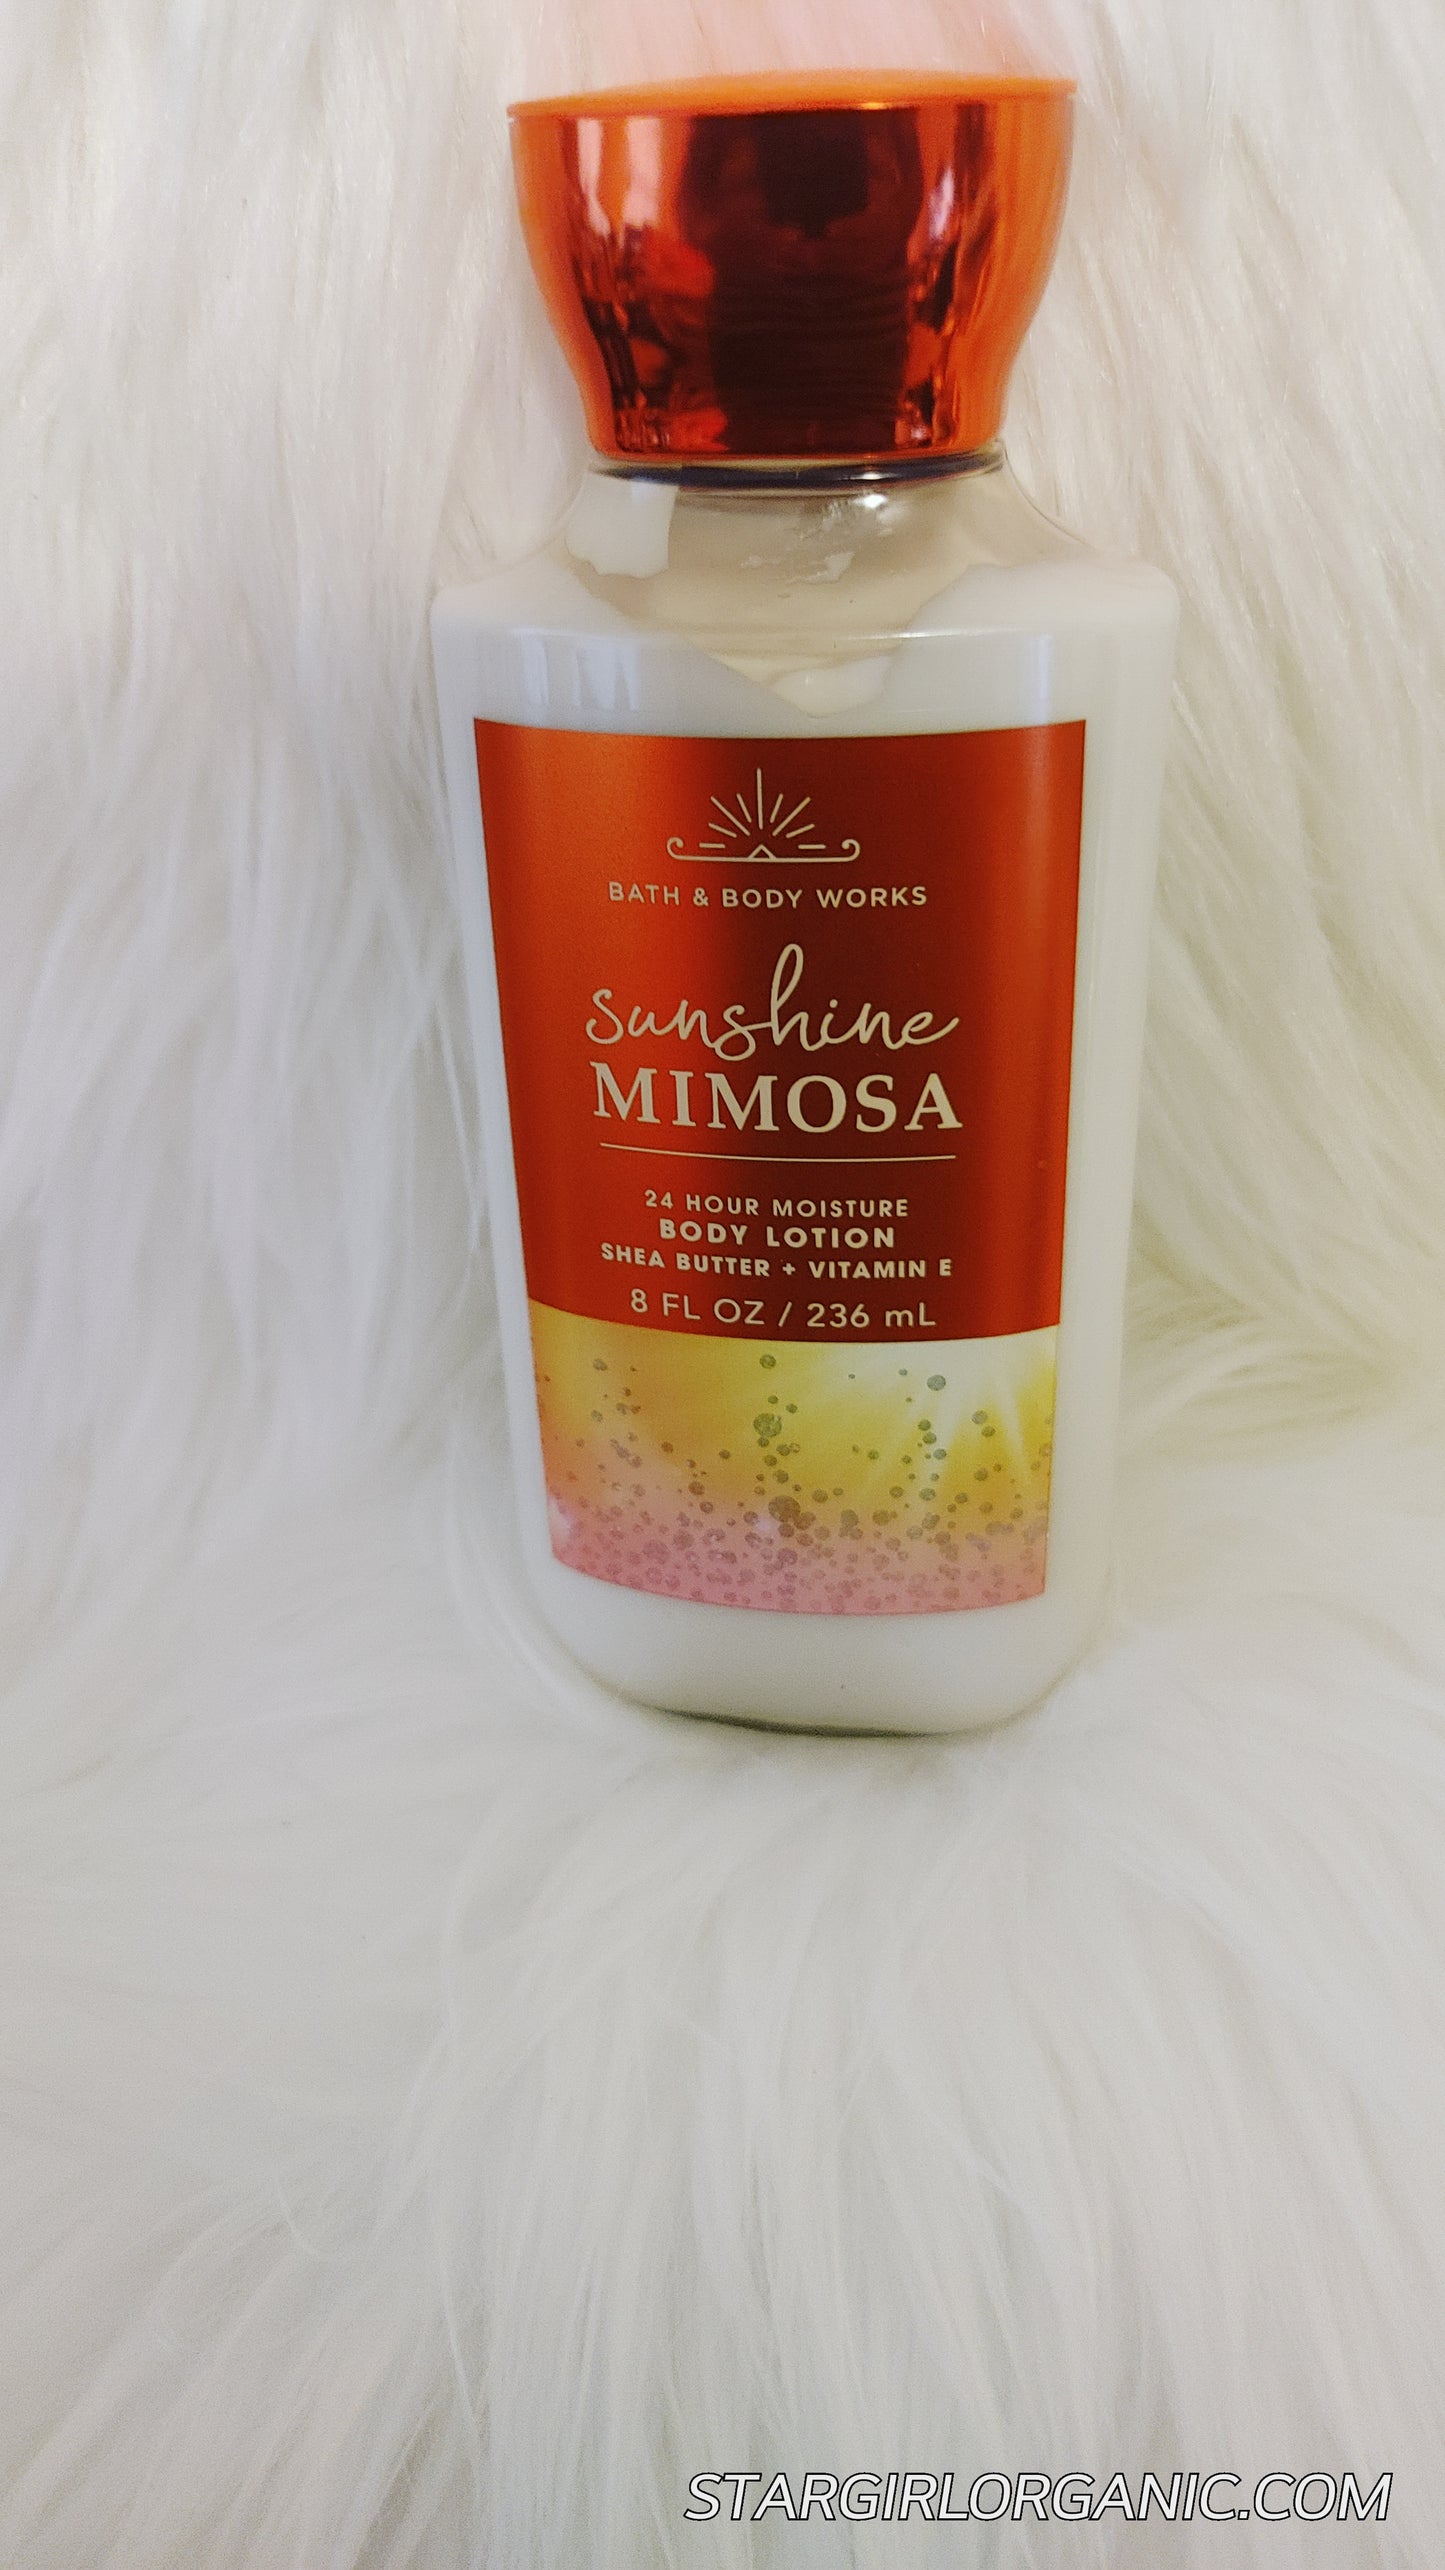 Bath and Body Works Sunshine Mimosa Body Lotion